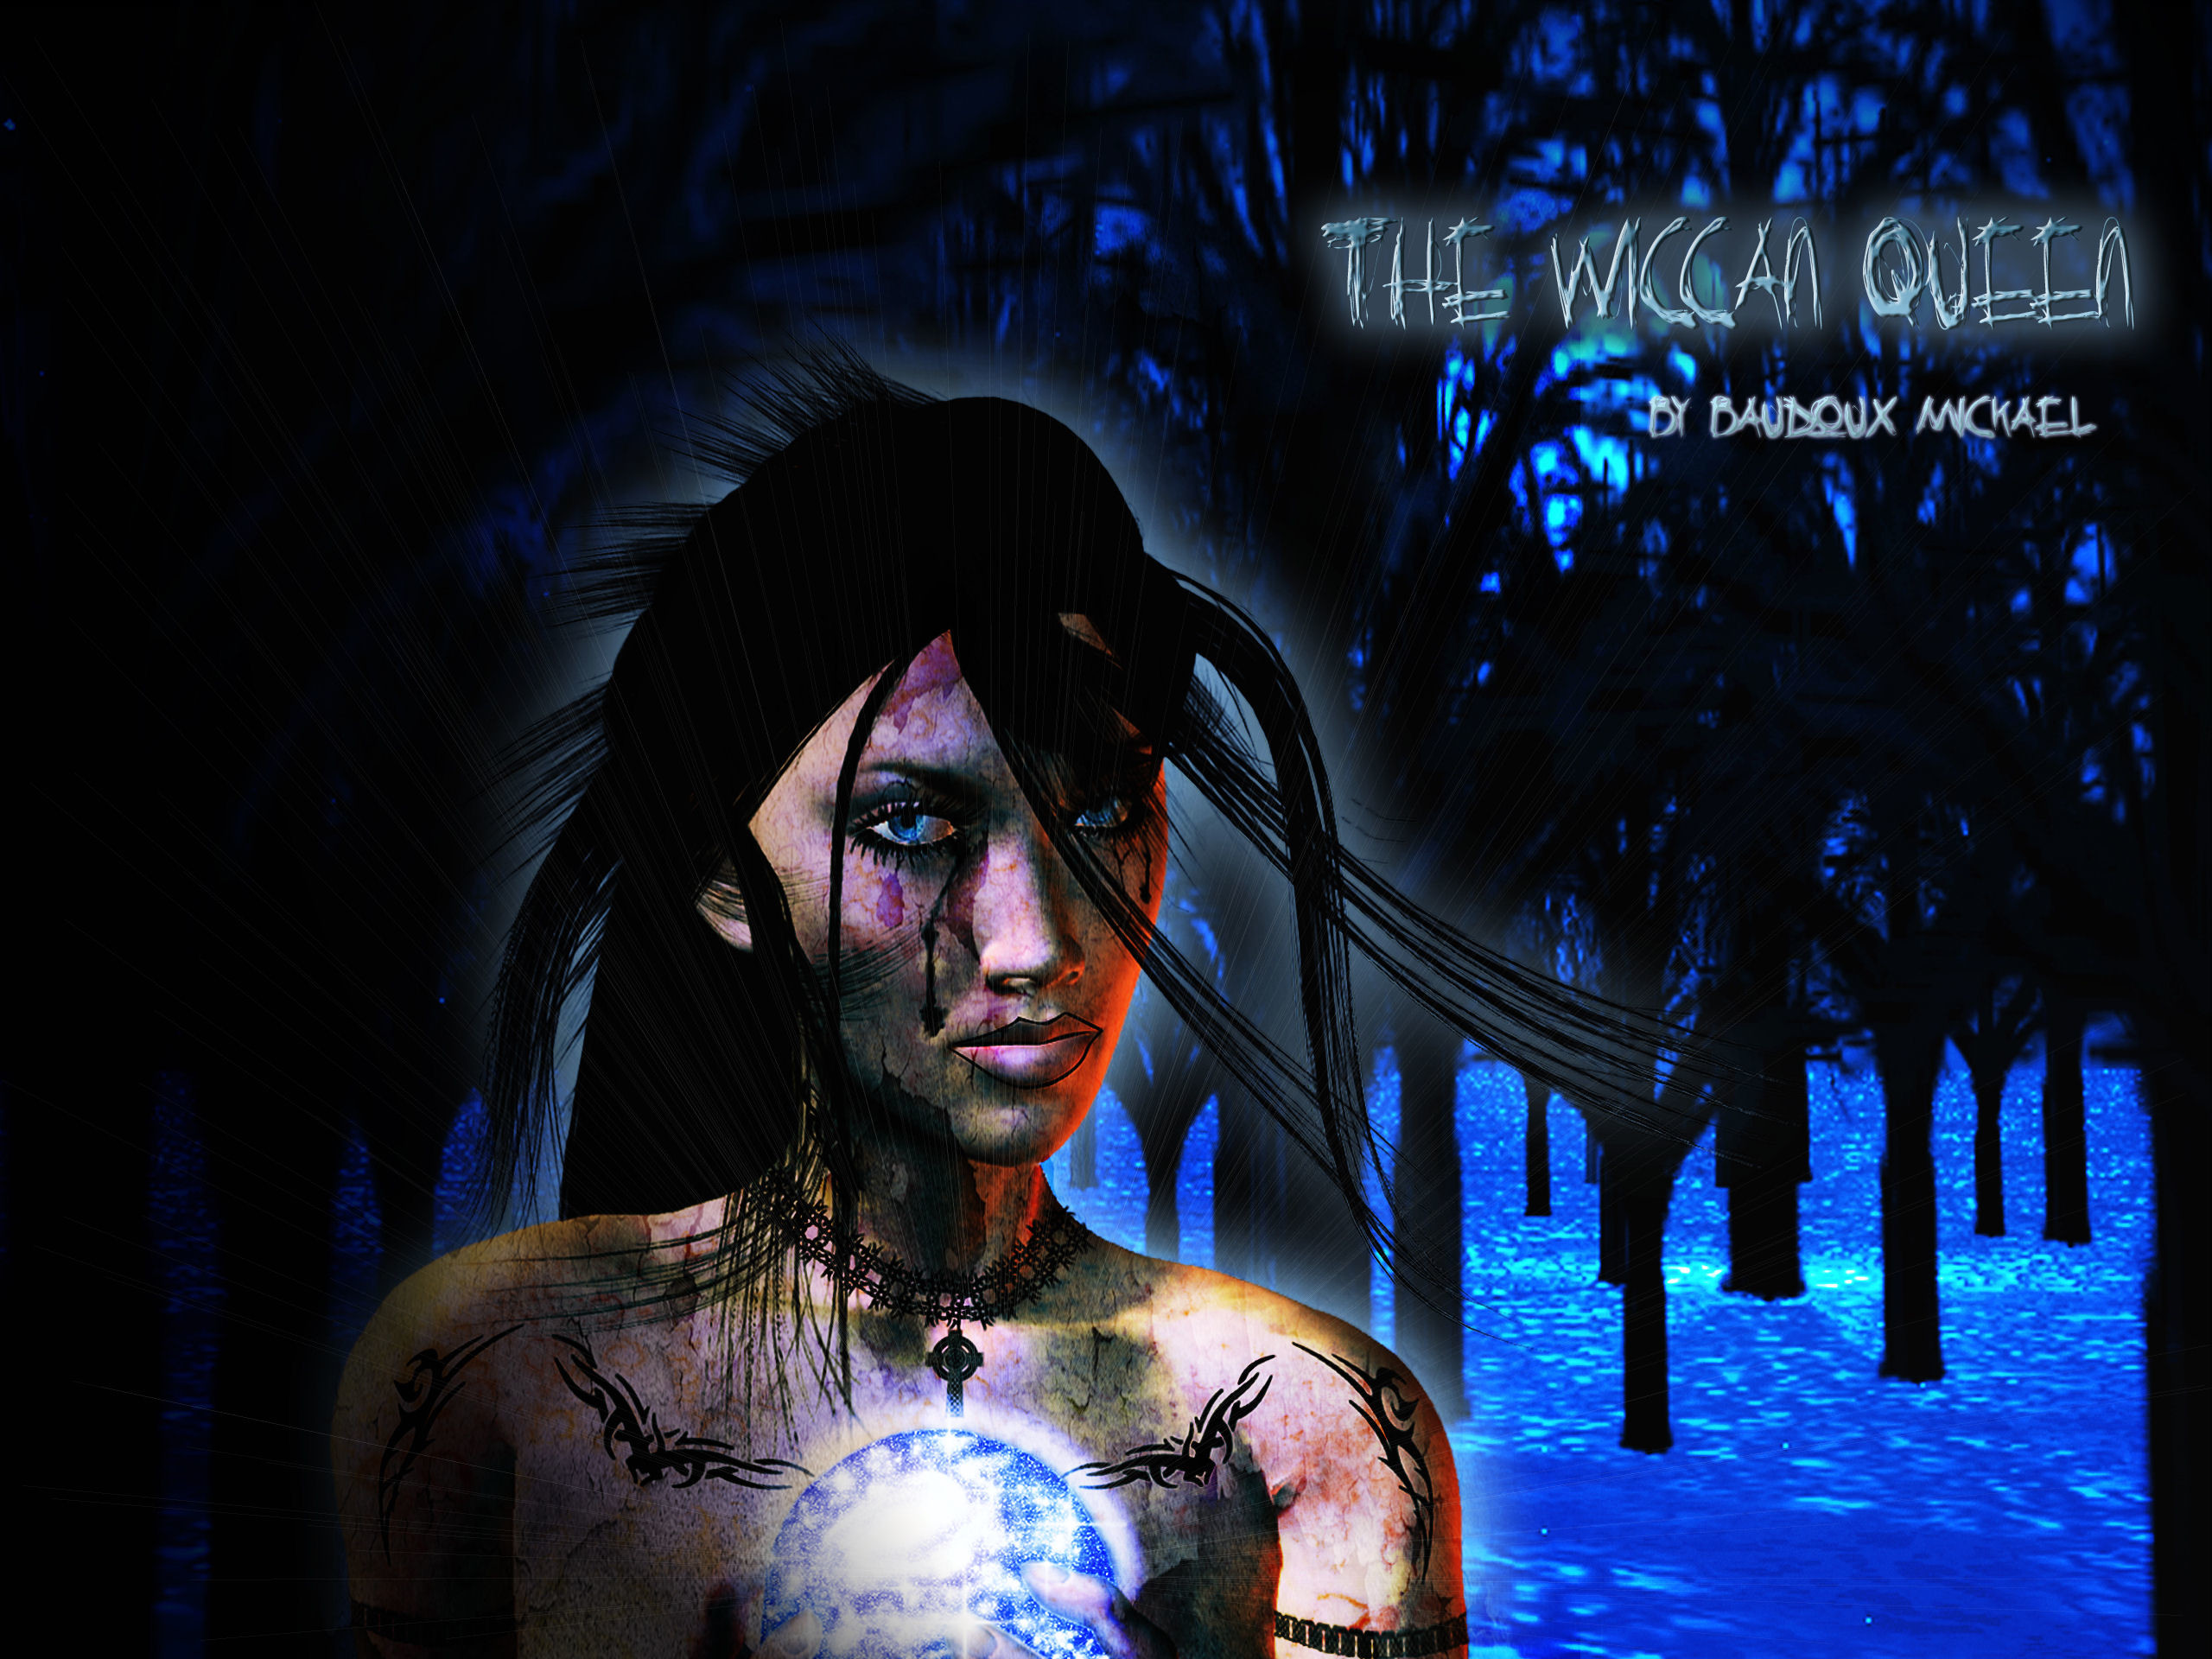 2560x1920 Background wallpaper, The wiccan Queen